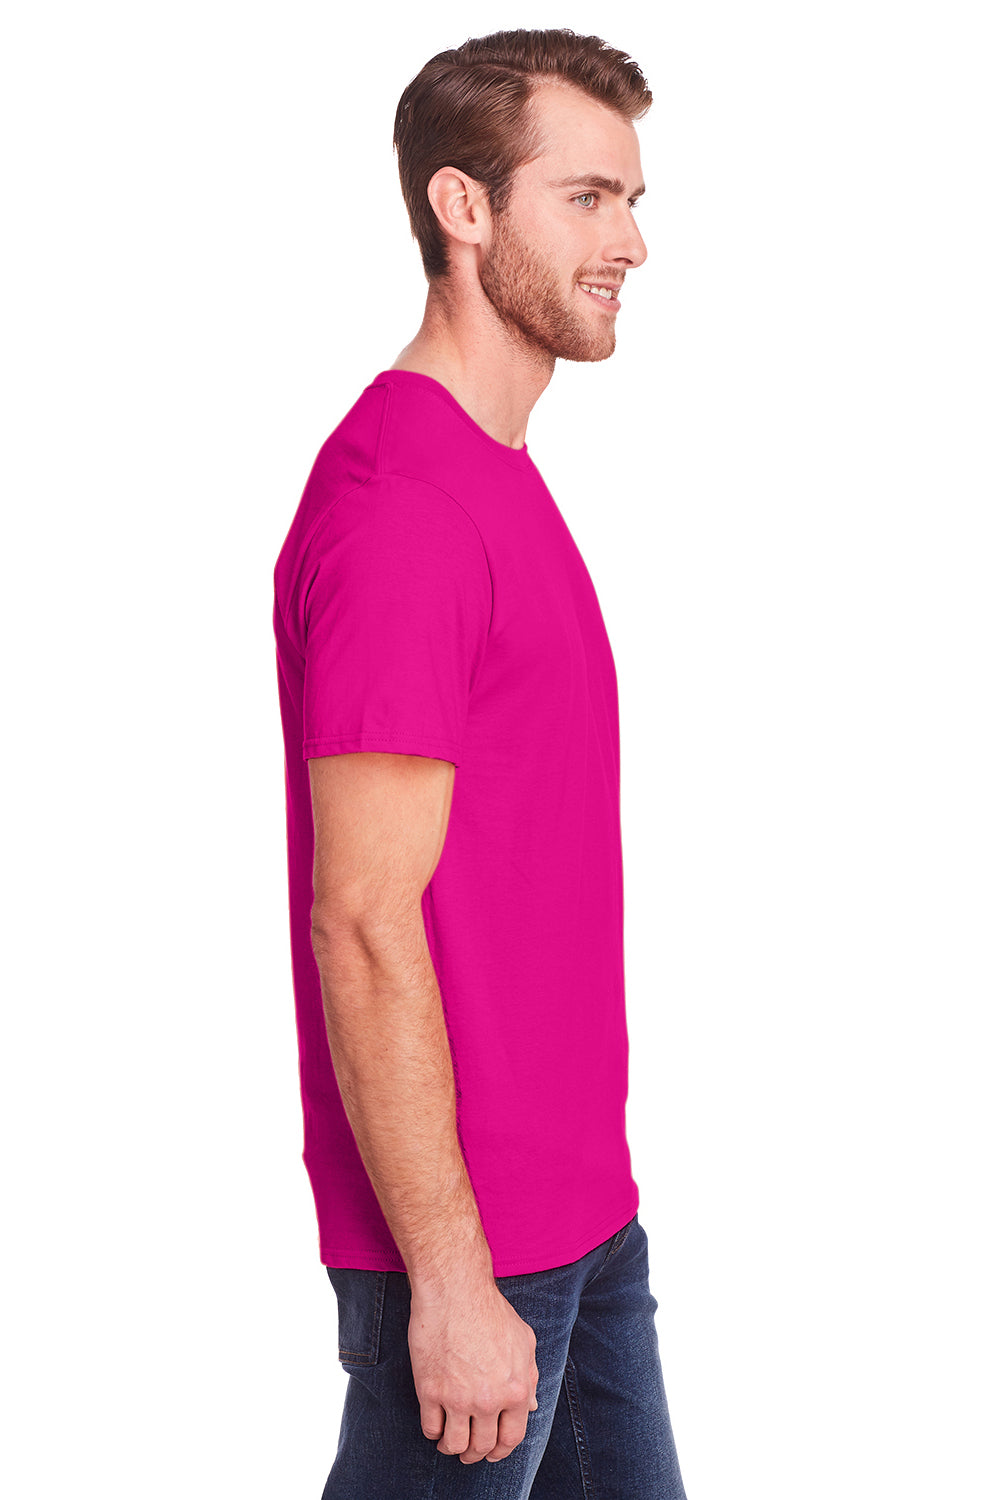 Fruit Of The Loom IC47MR Mens Iconic Short Sleeve Crewneck T-Shirt Cyber Pink Side